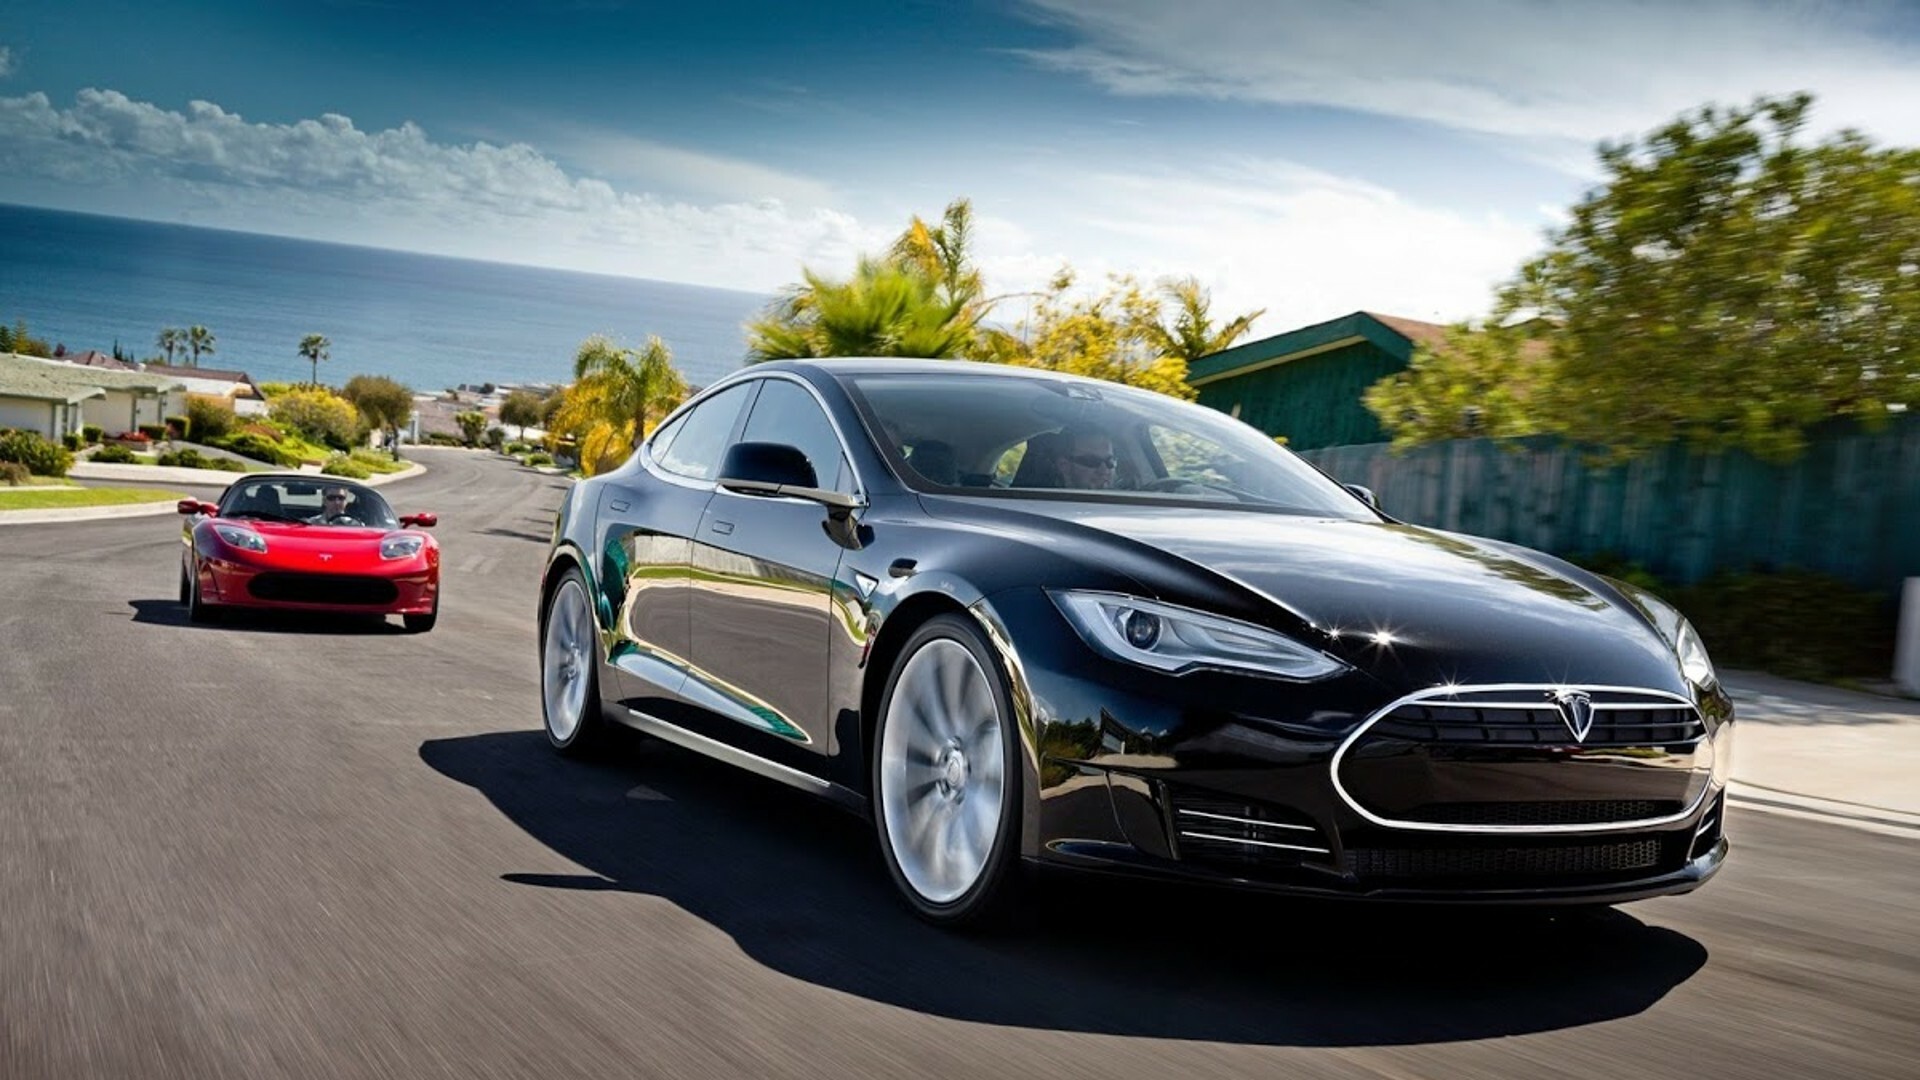 Car Guys' can love electric cars too. In fact, true innovators seem to  flock to the new tech